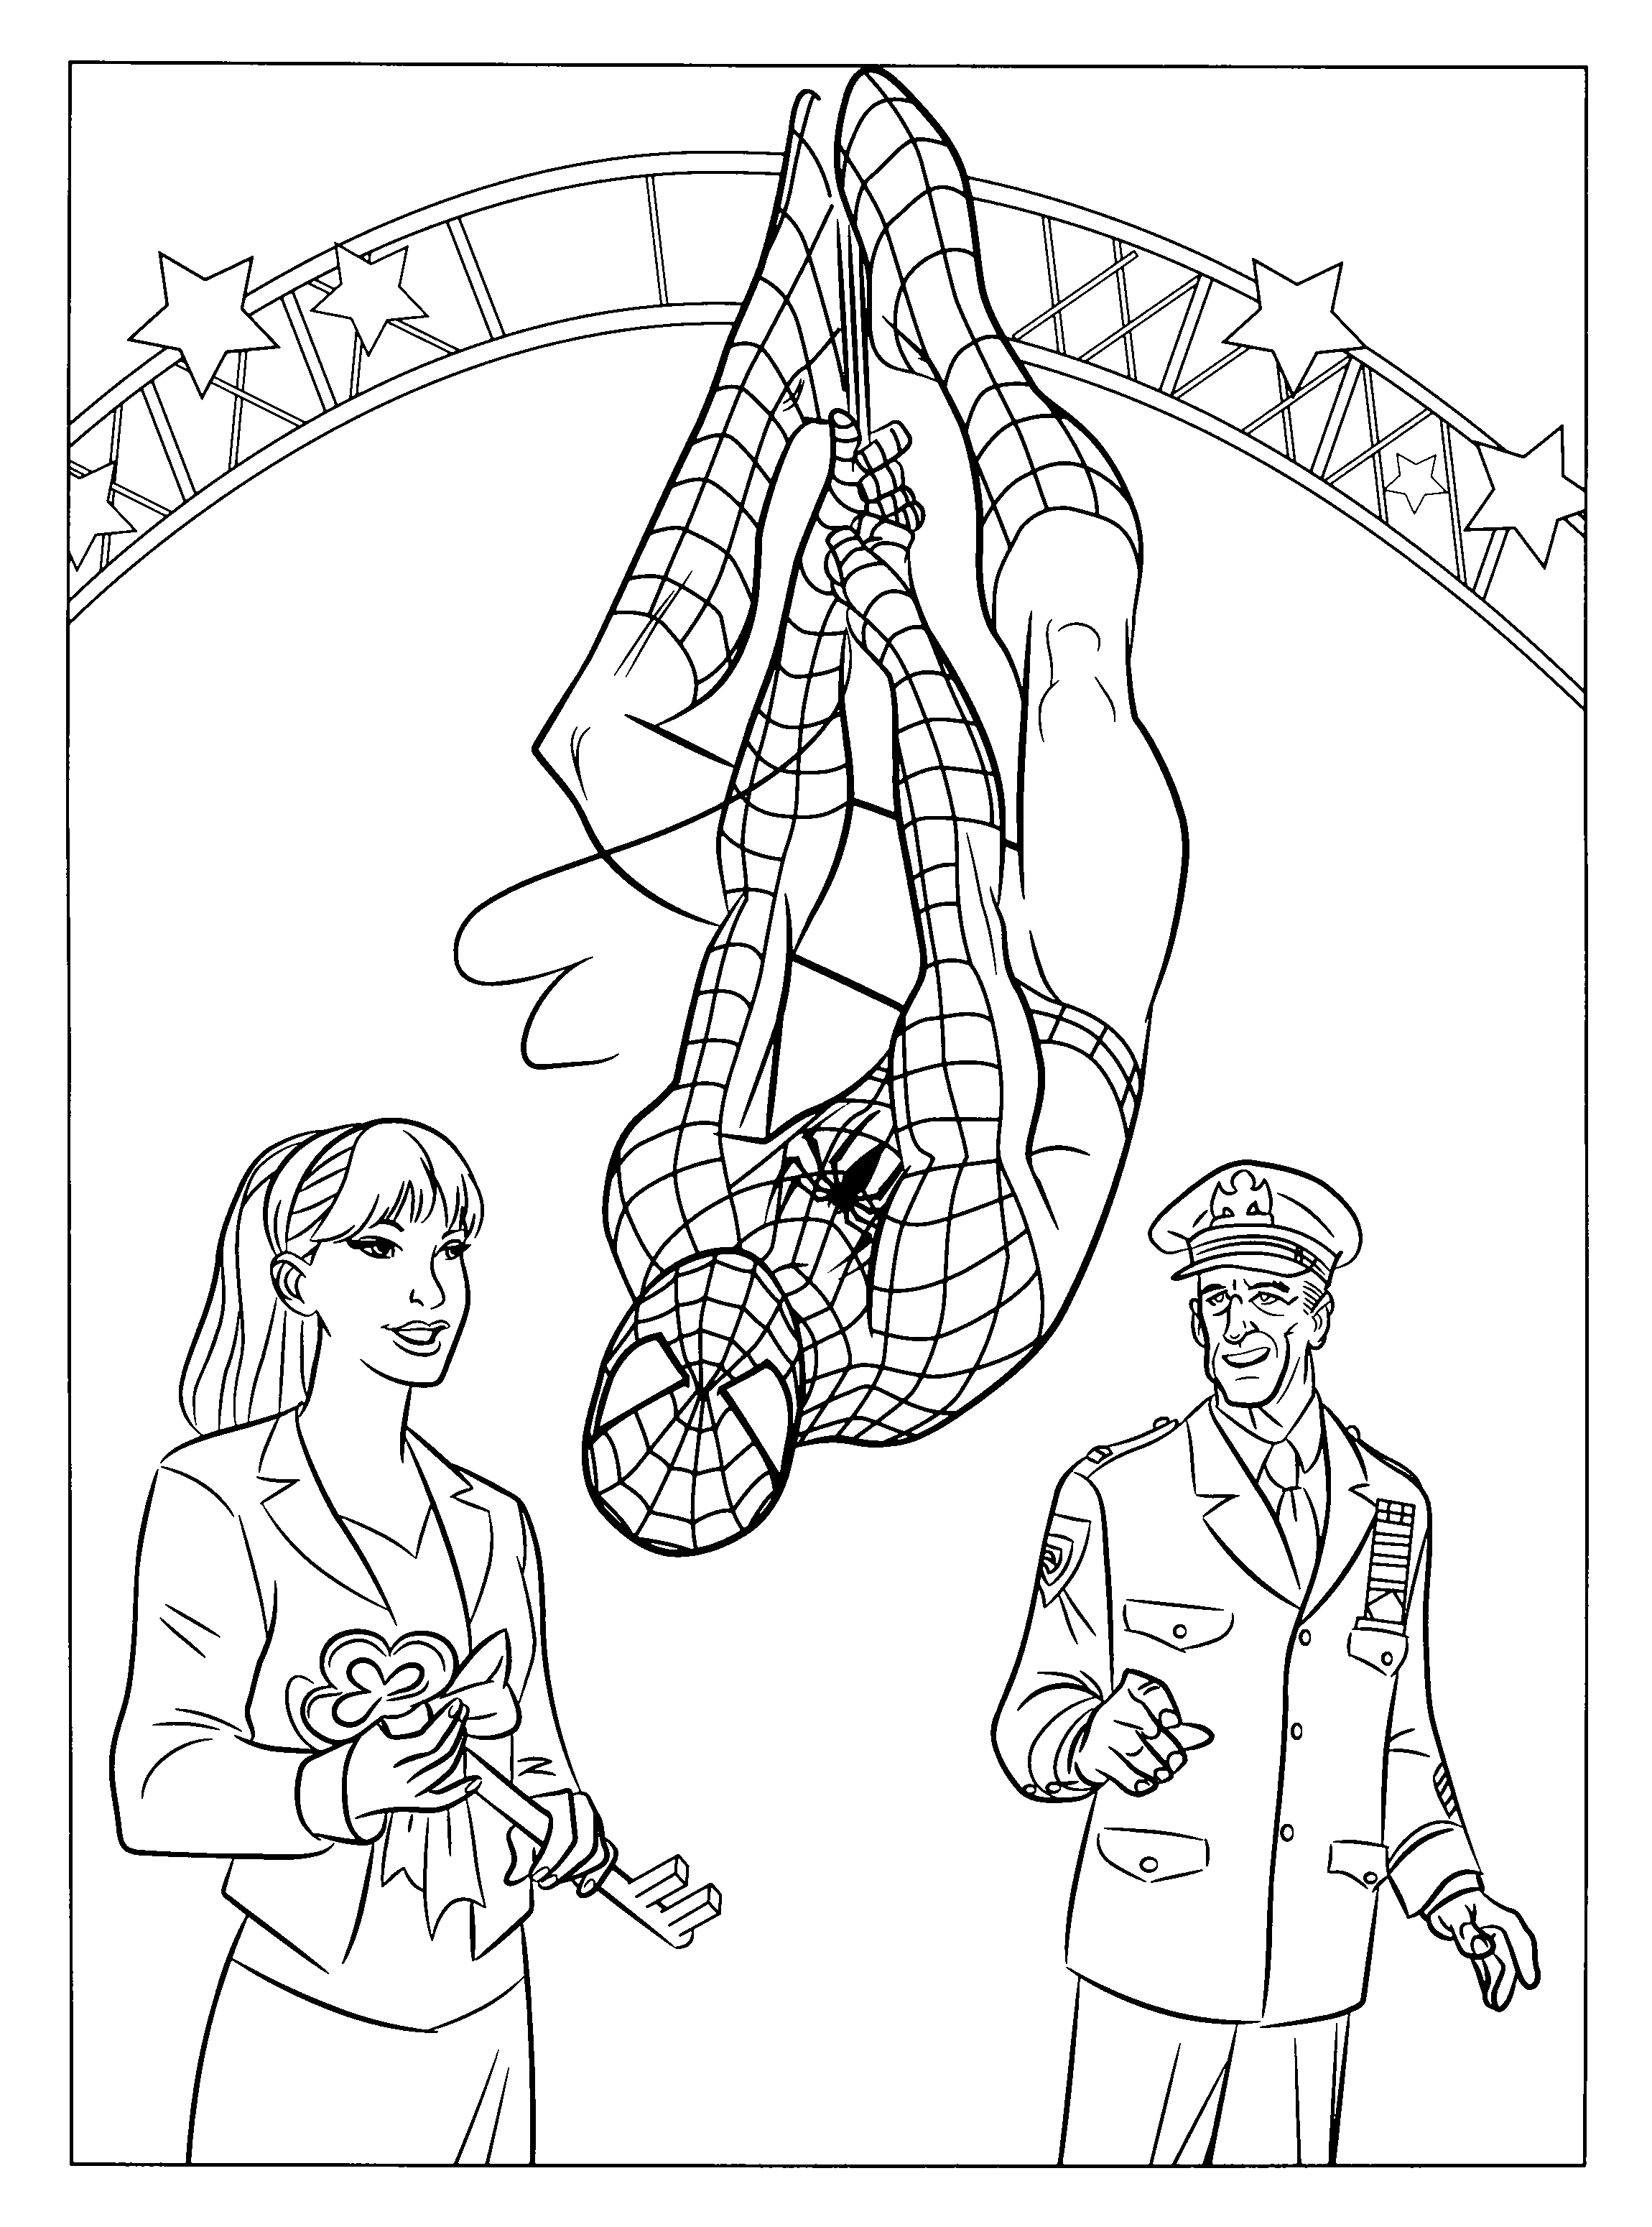 spider man coloring sheet the amazing spider man coloring pages spiderman color spider coloring sheet man 